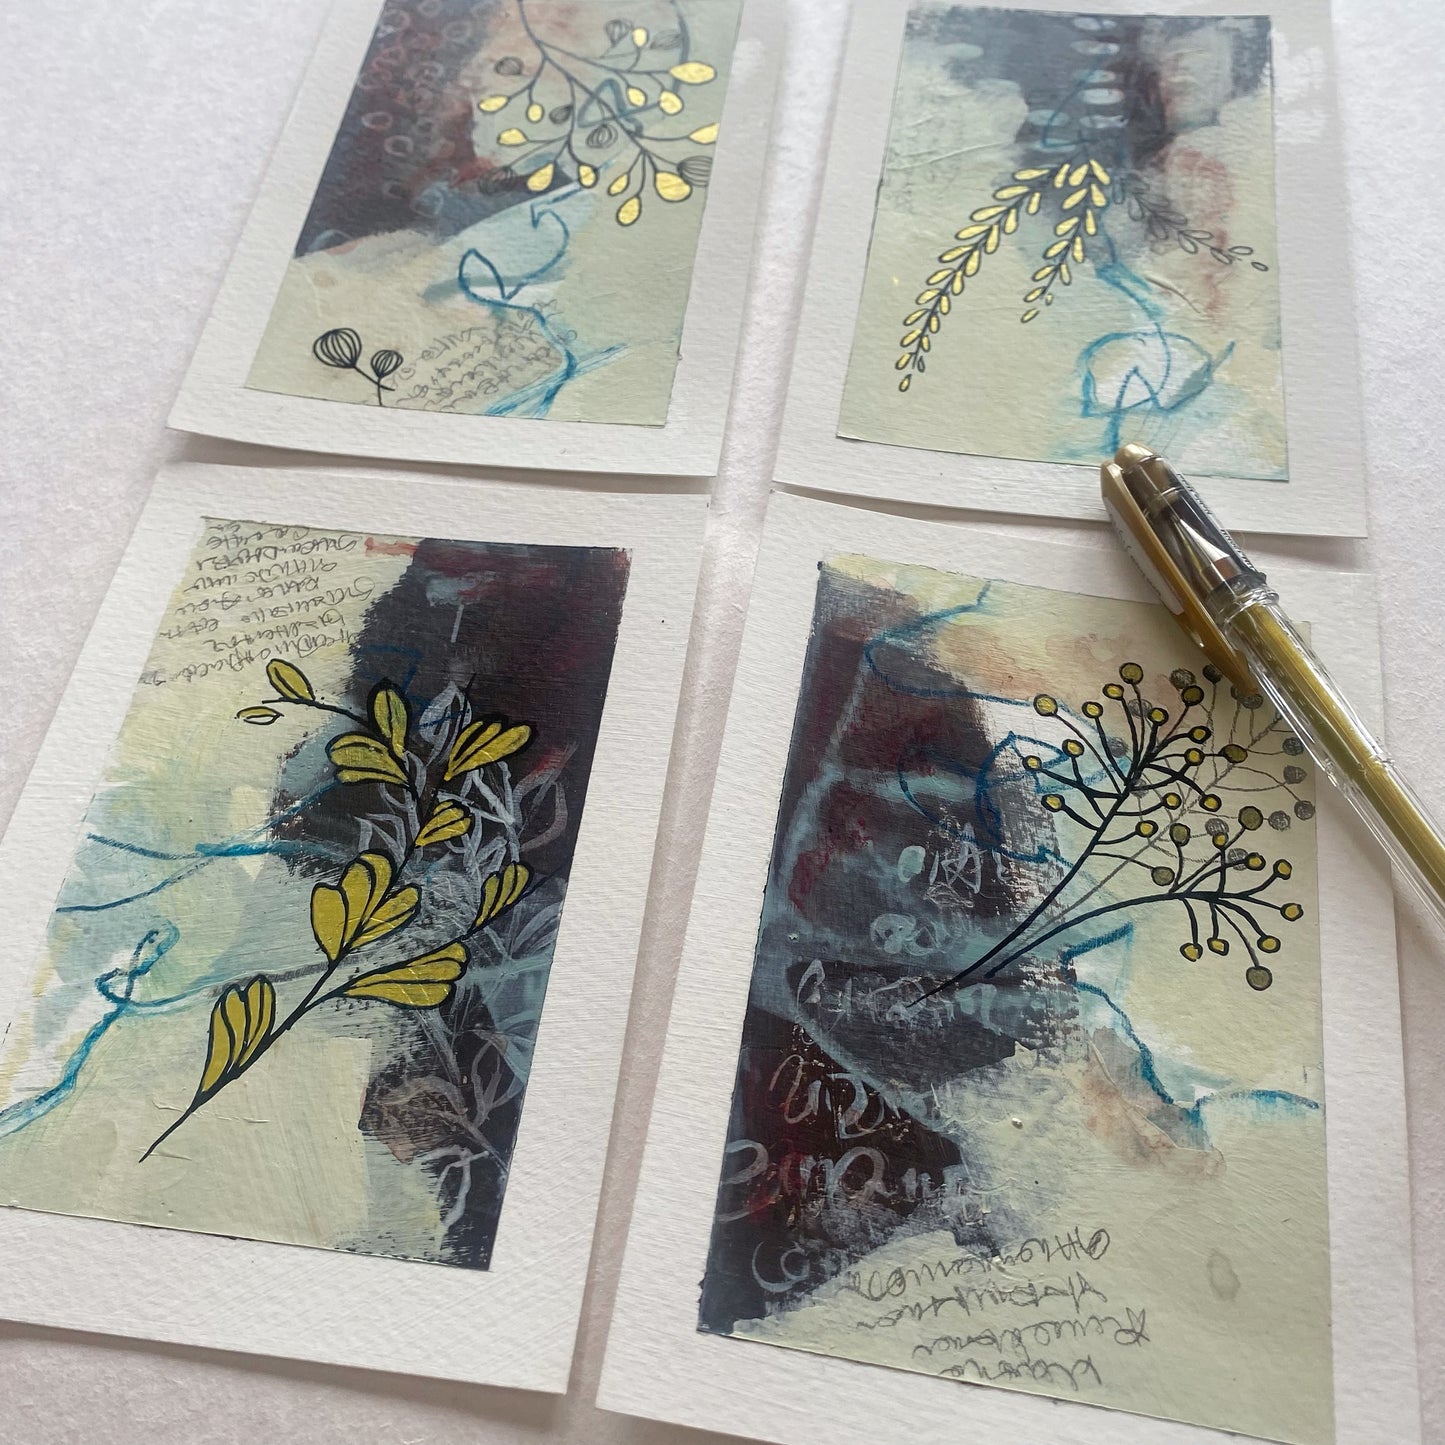 Go With the Flow IV - set of 4 mini original paintings with gold detail